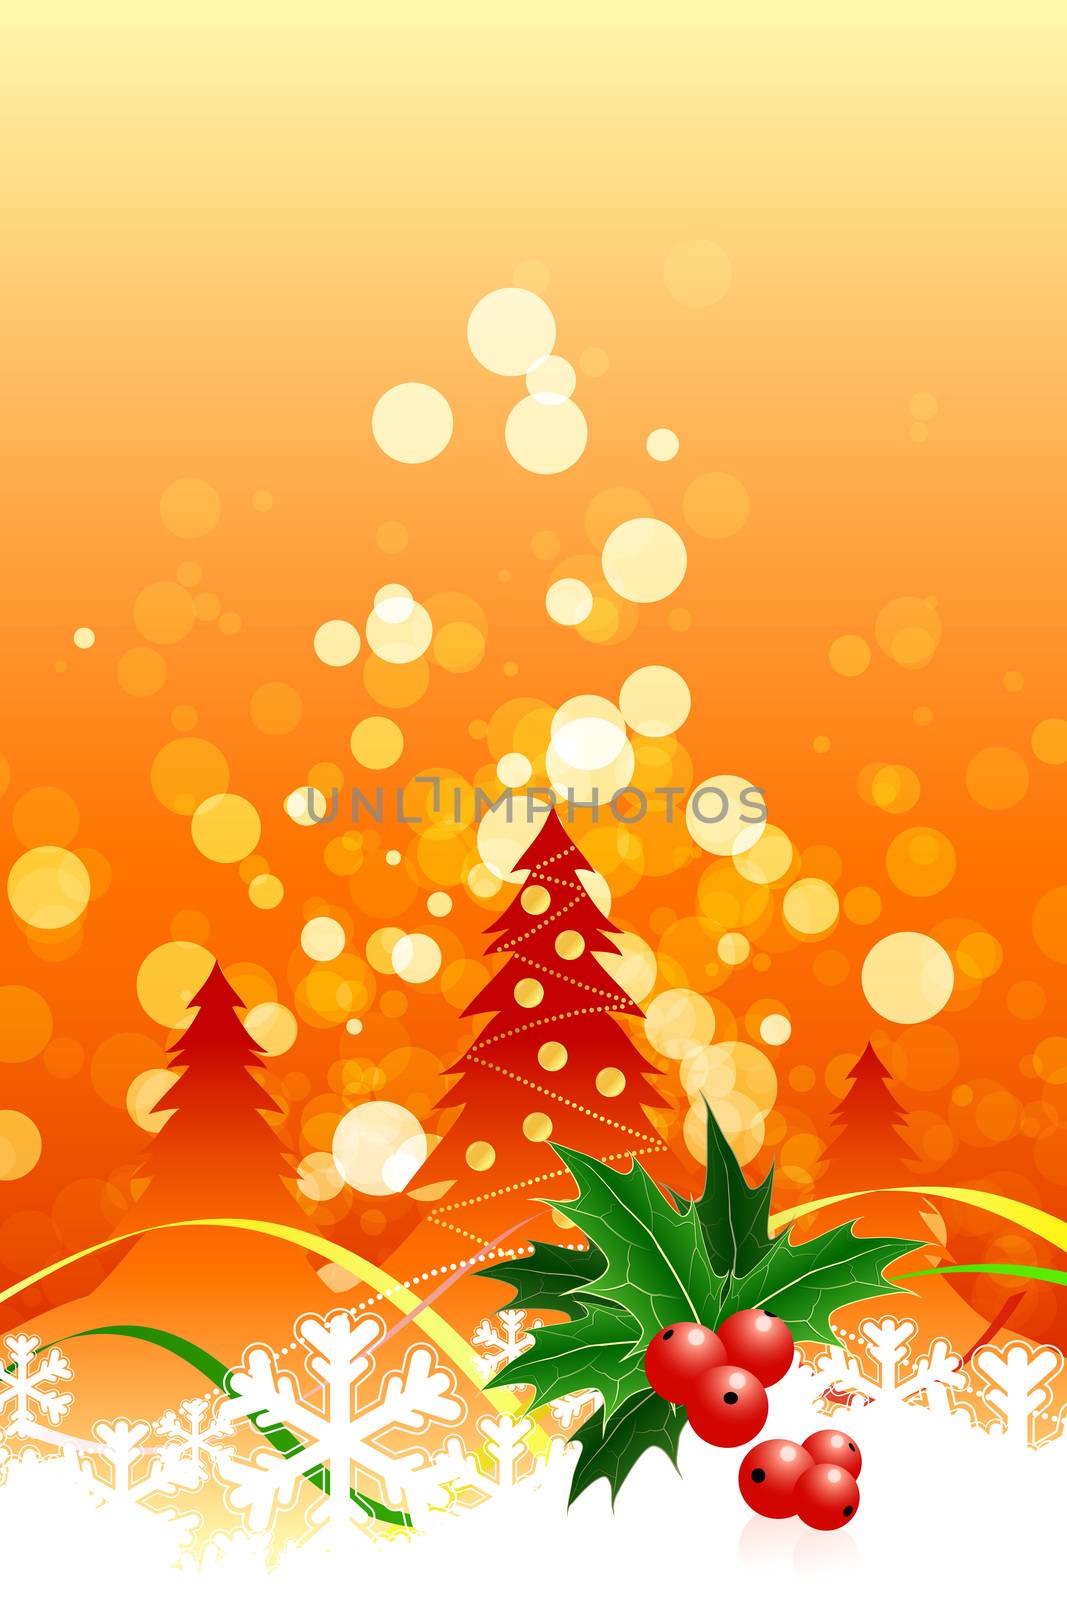 Christmas background with Christmas tree and mistletoe for your design